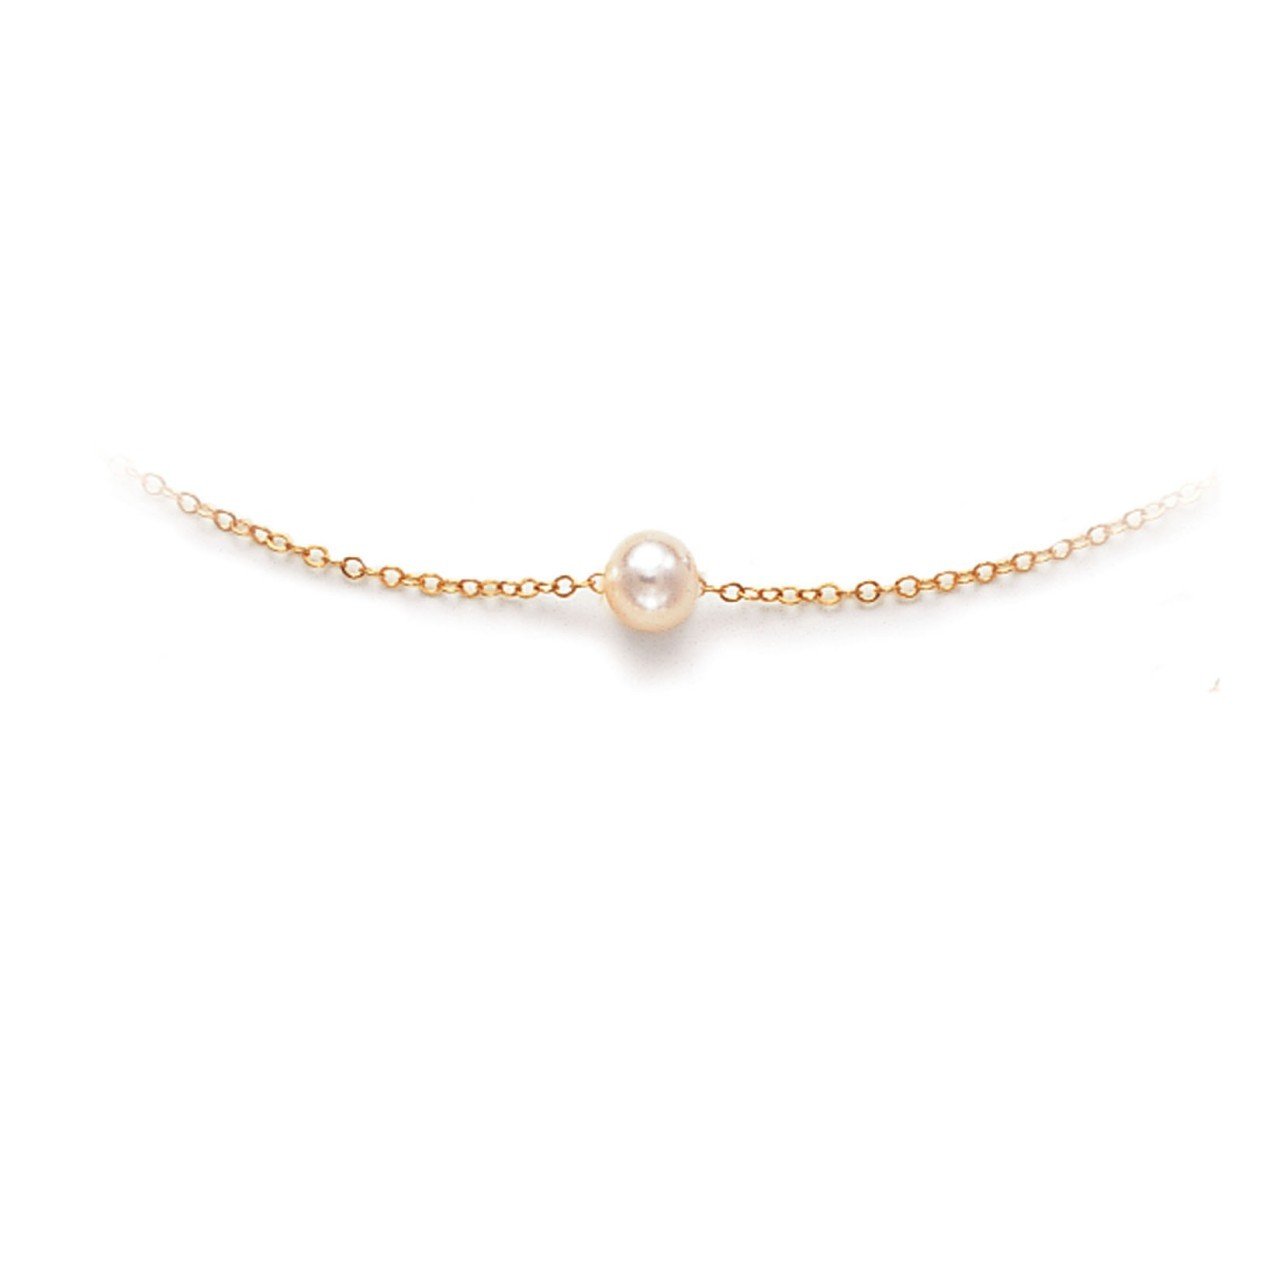 Princesse Pearl Cultured Starter Necklace in One Pearl